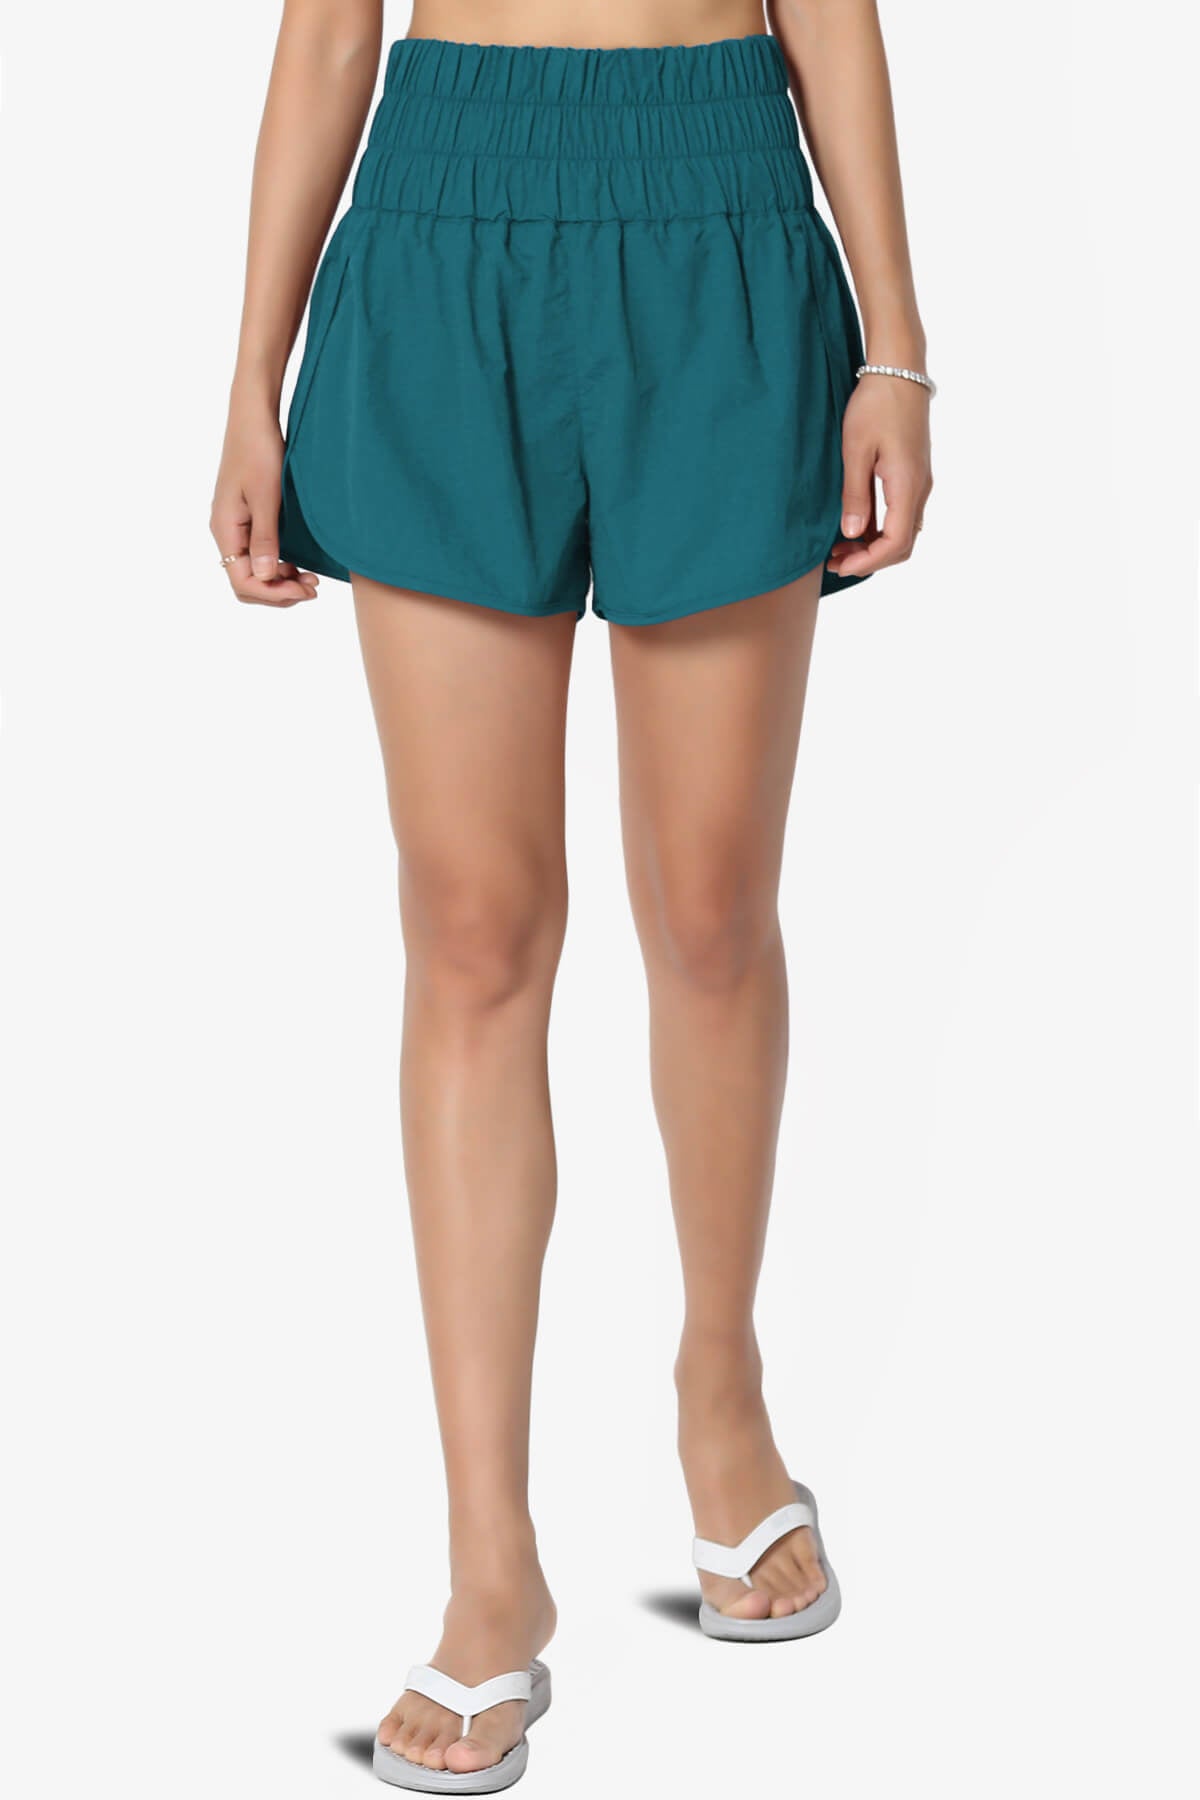 The Way Home Running Shorts TEAL_1